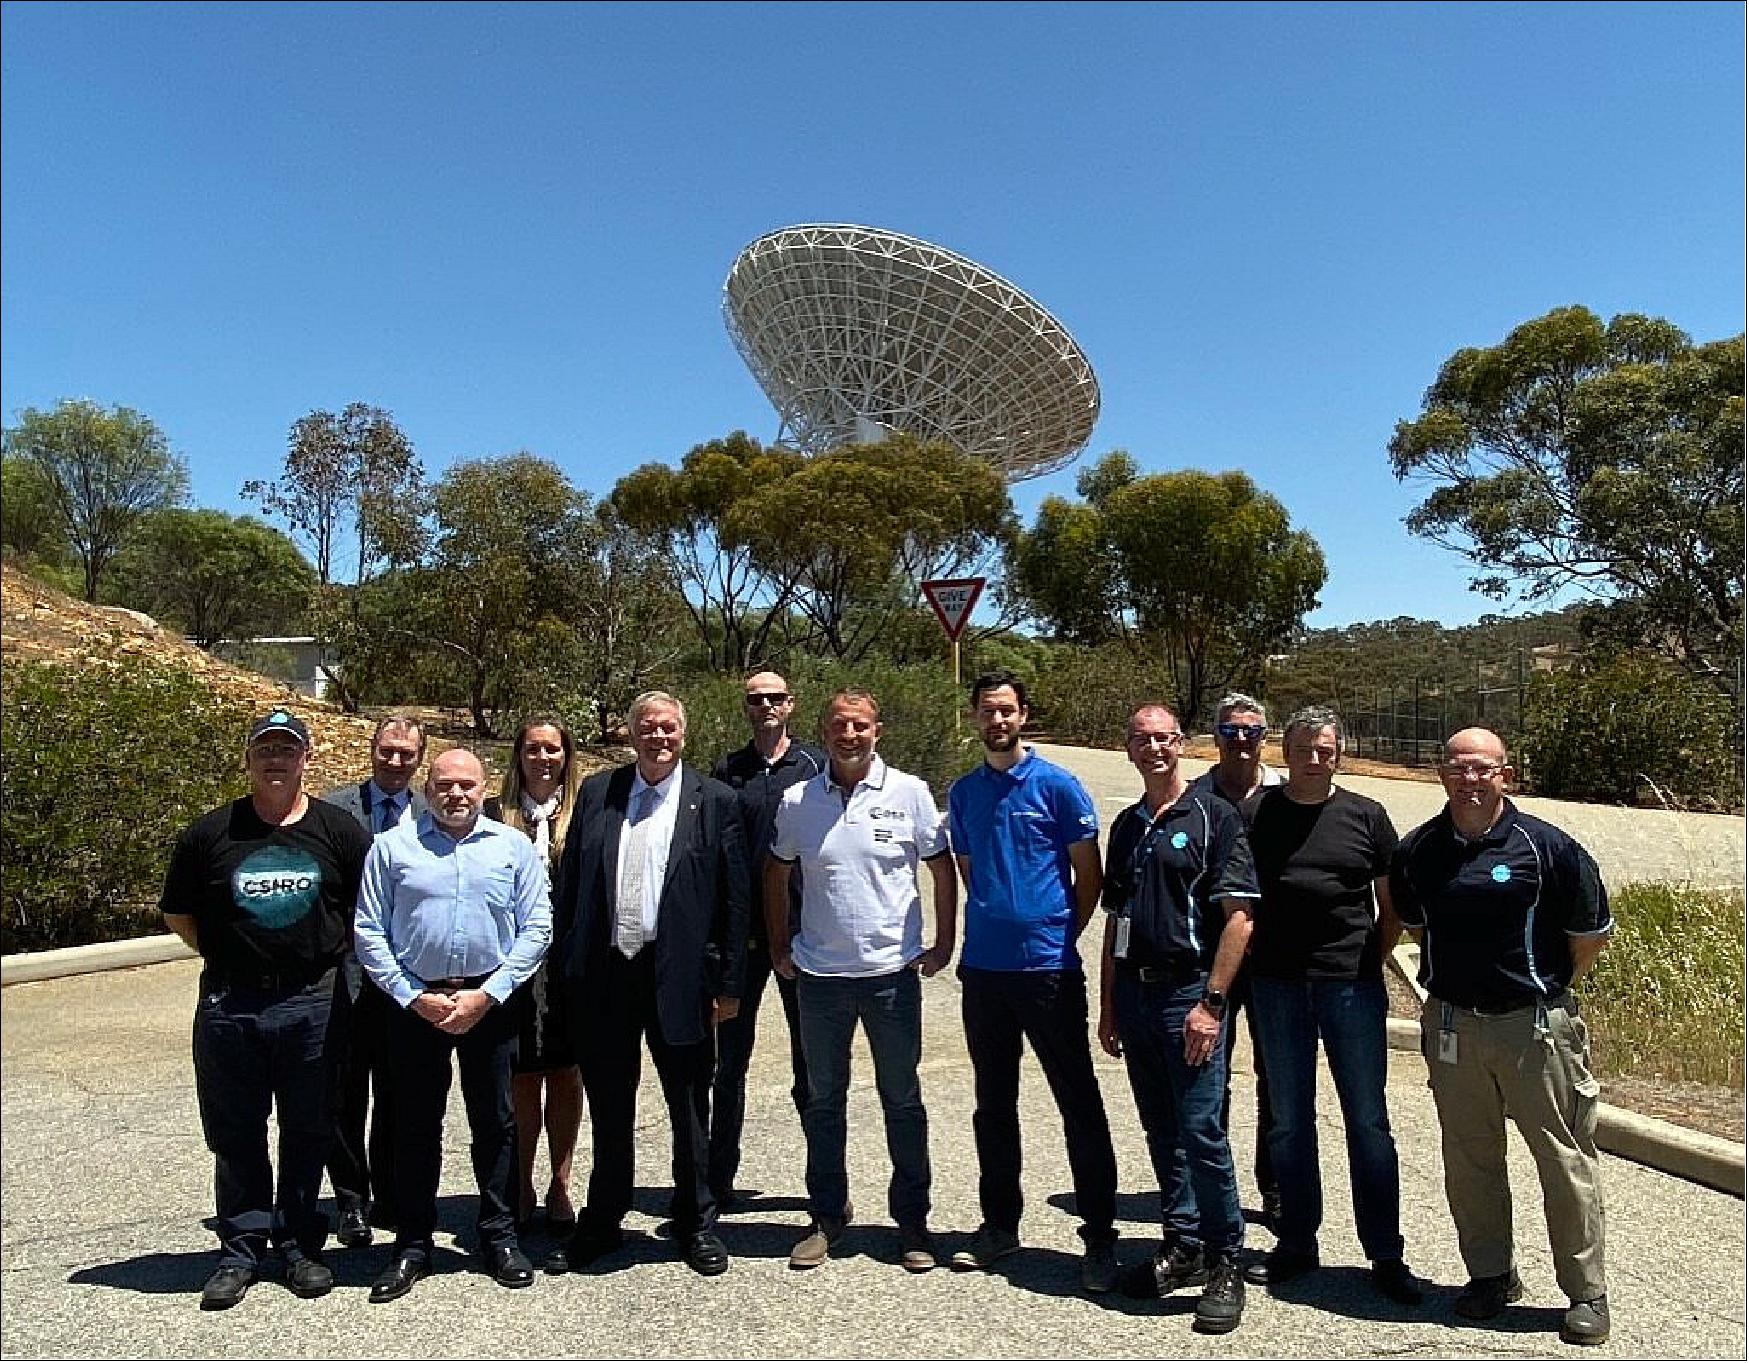 Figure 23: On 6 November, during the antenna maintenance, the New Norcia site was visited by Hon. Kim Beazley AC, formerly Deputy Prime Minister and current Governor of Western Australia. The timing was perfect, as CSIRO and ESA staff could give Governor Beazley a full tour of the facilities – showcasing the cooperation at New Norcia between the Australian Space Agency and ESA (image credit: ESA, Suzy Jackson)